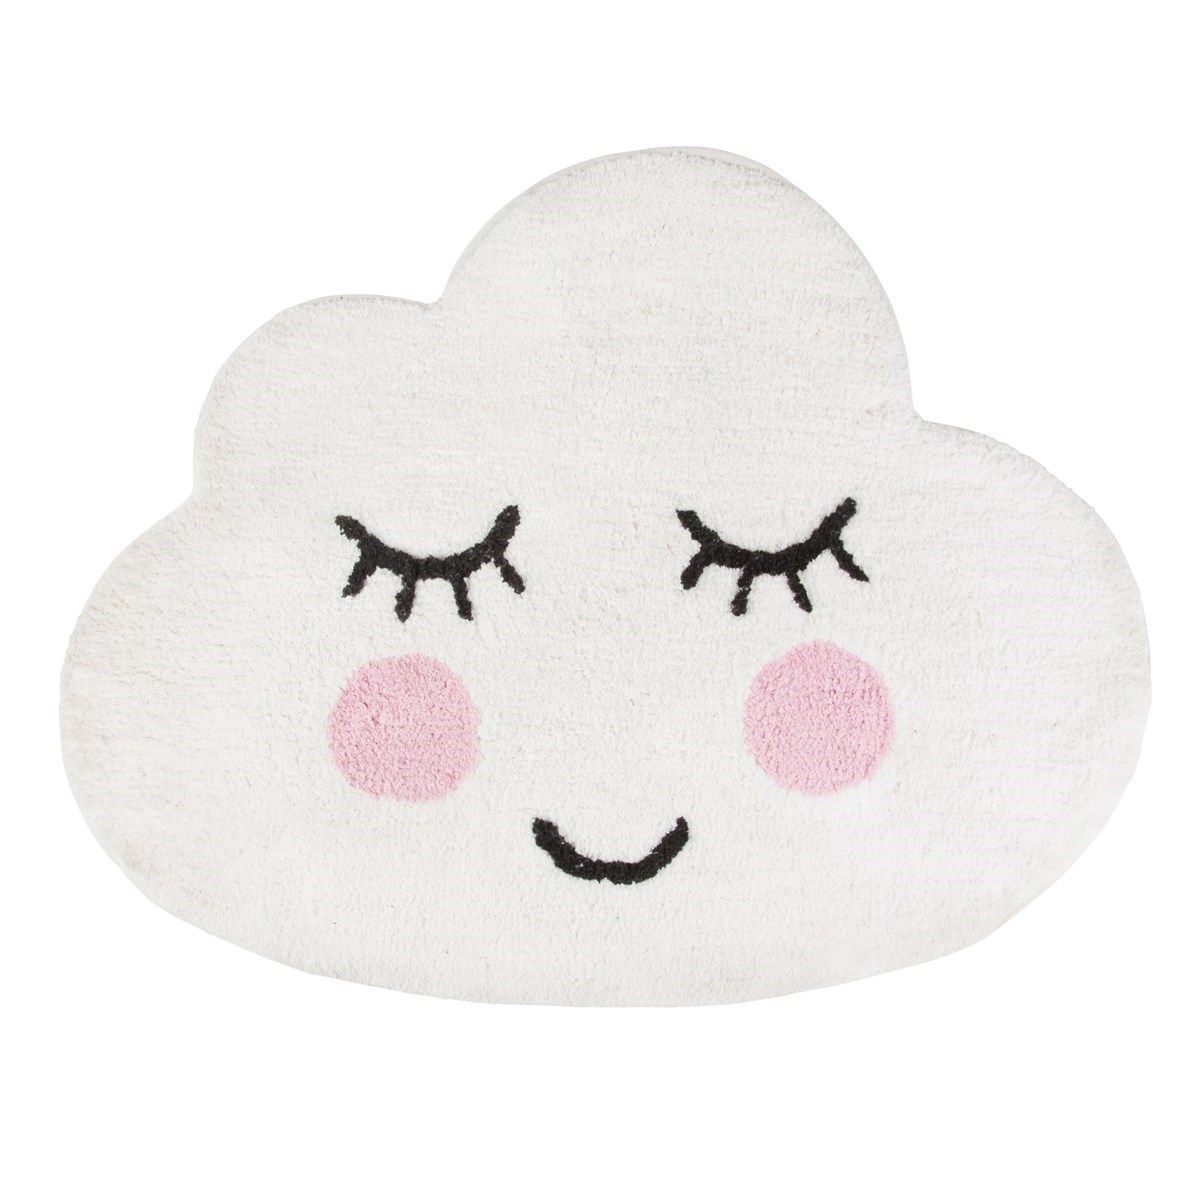 Sass & Belle Sweet Dreams Smiling Cloud Rug - White